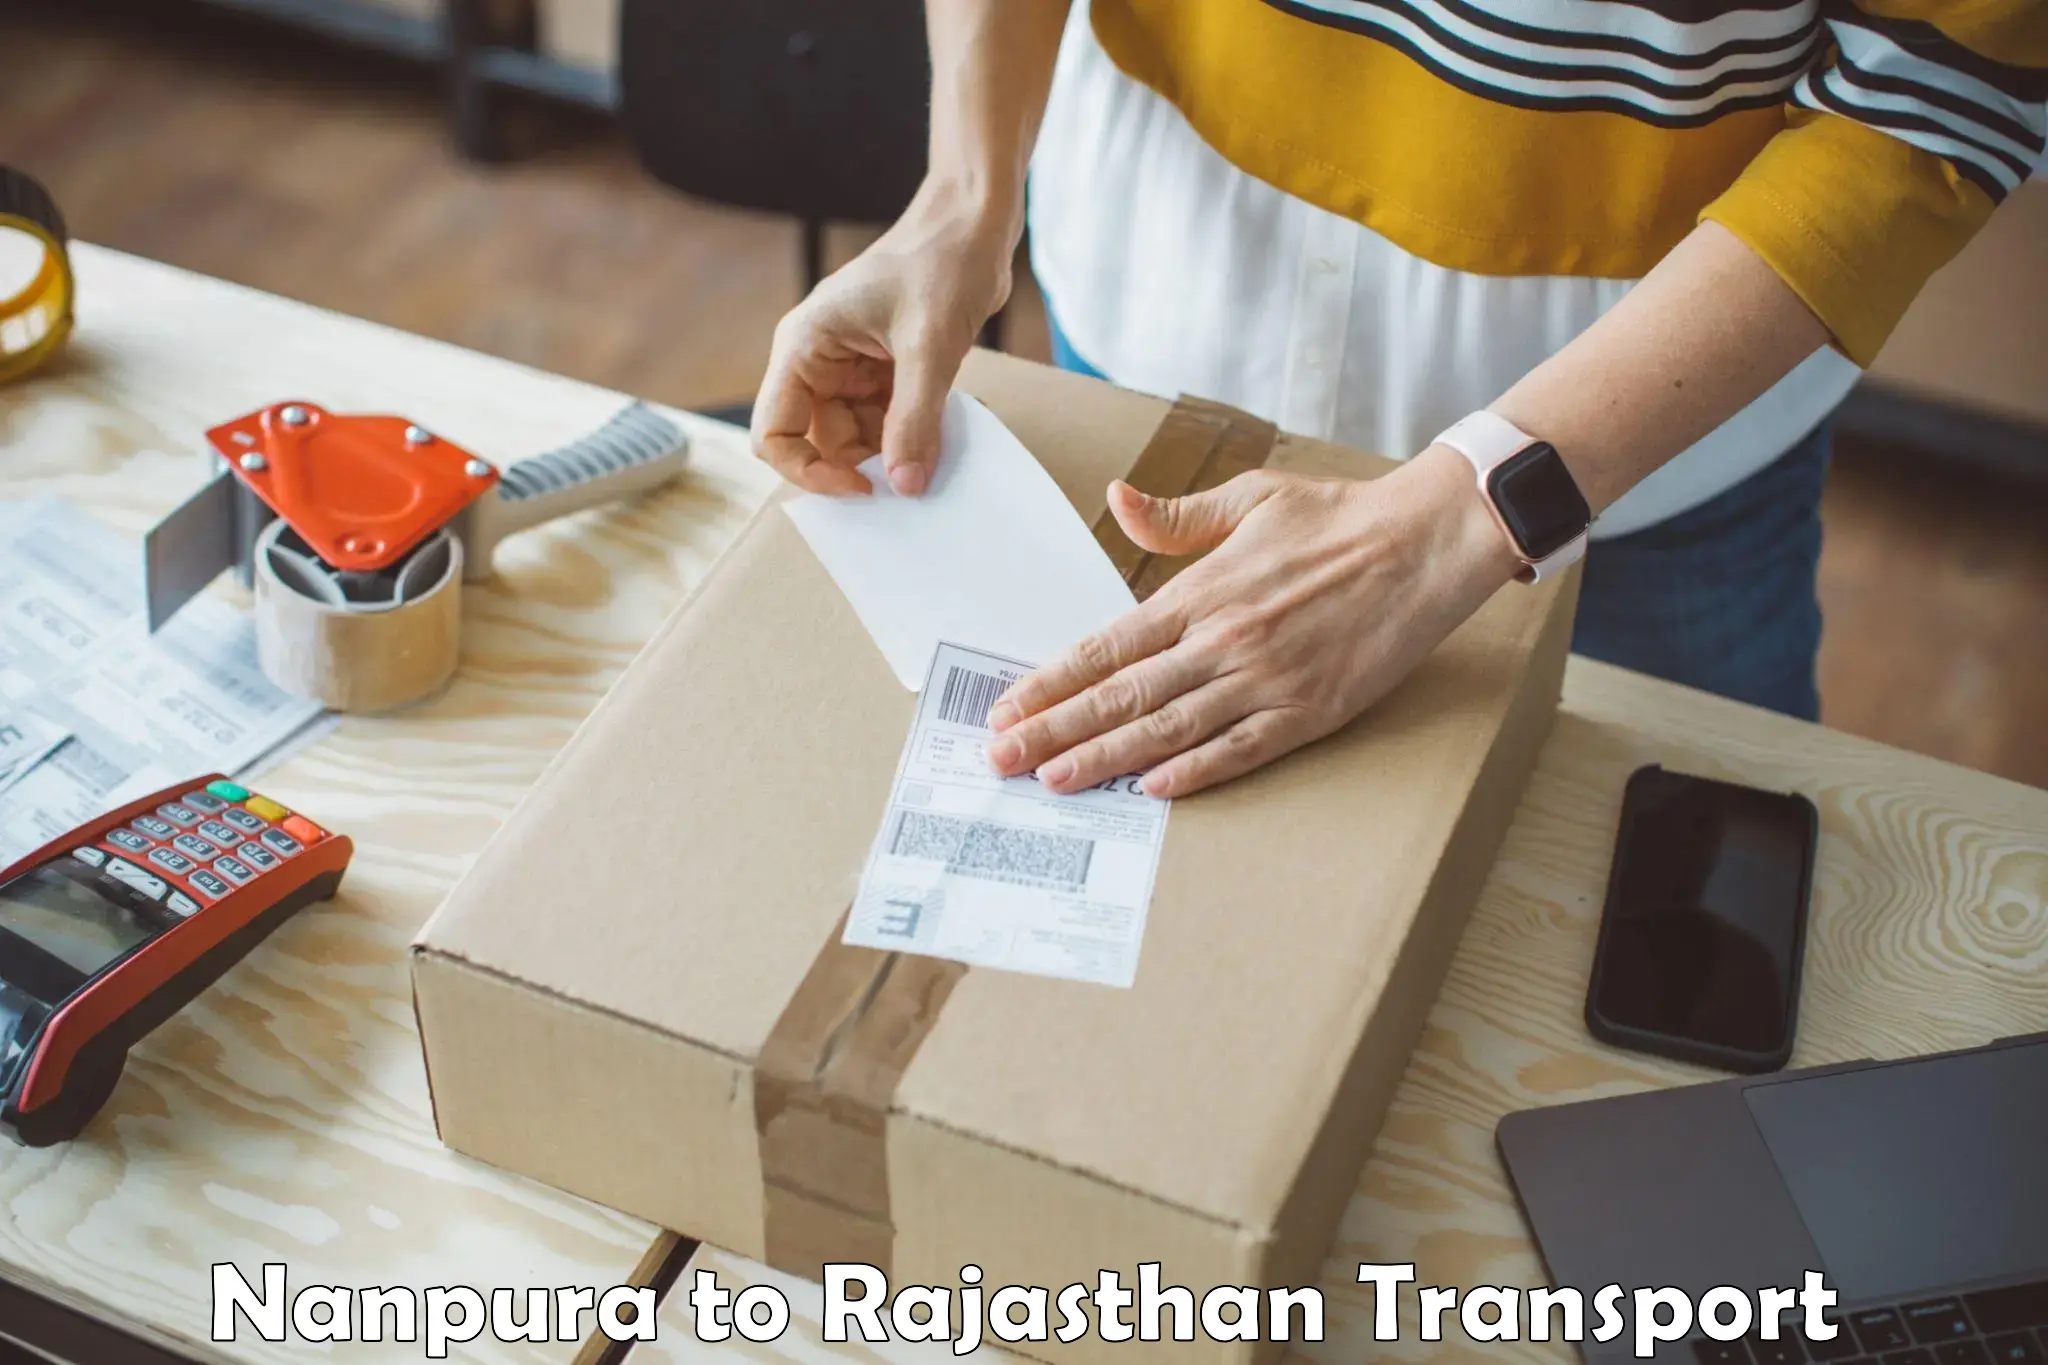 Container transport service Nanpura to Rajasthan